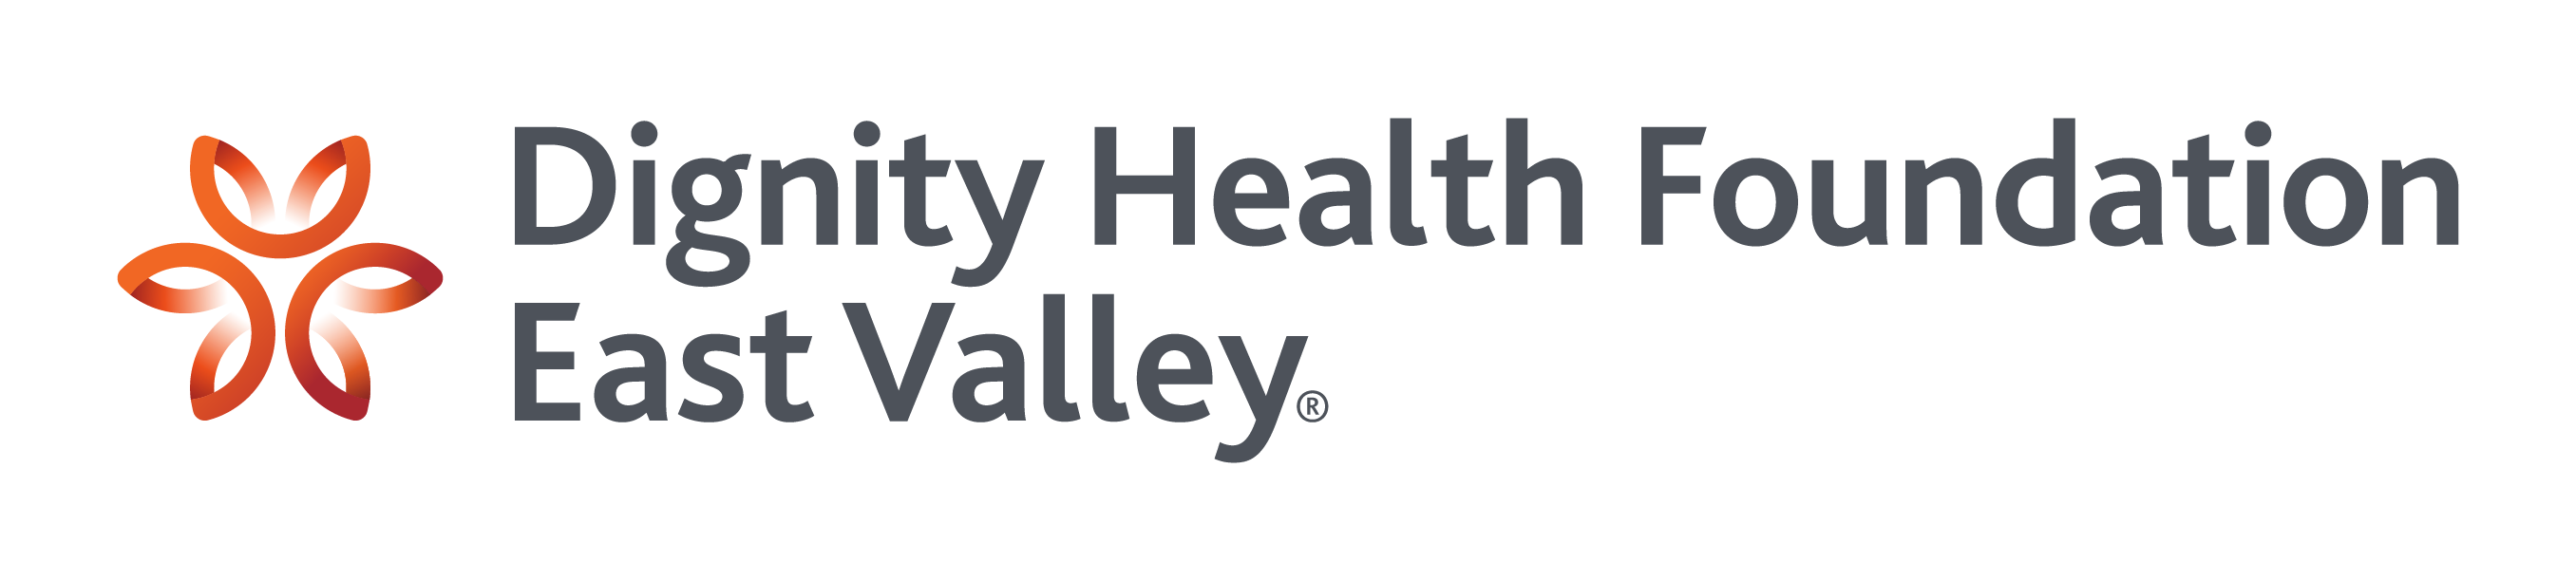 Dignity Health Foundation East Valley logo